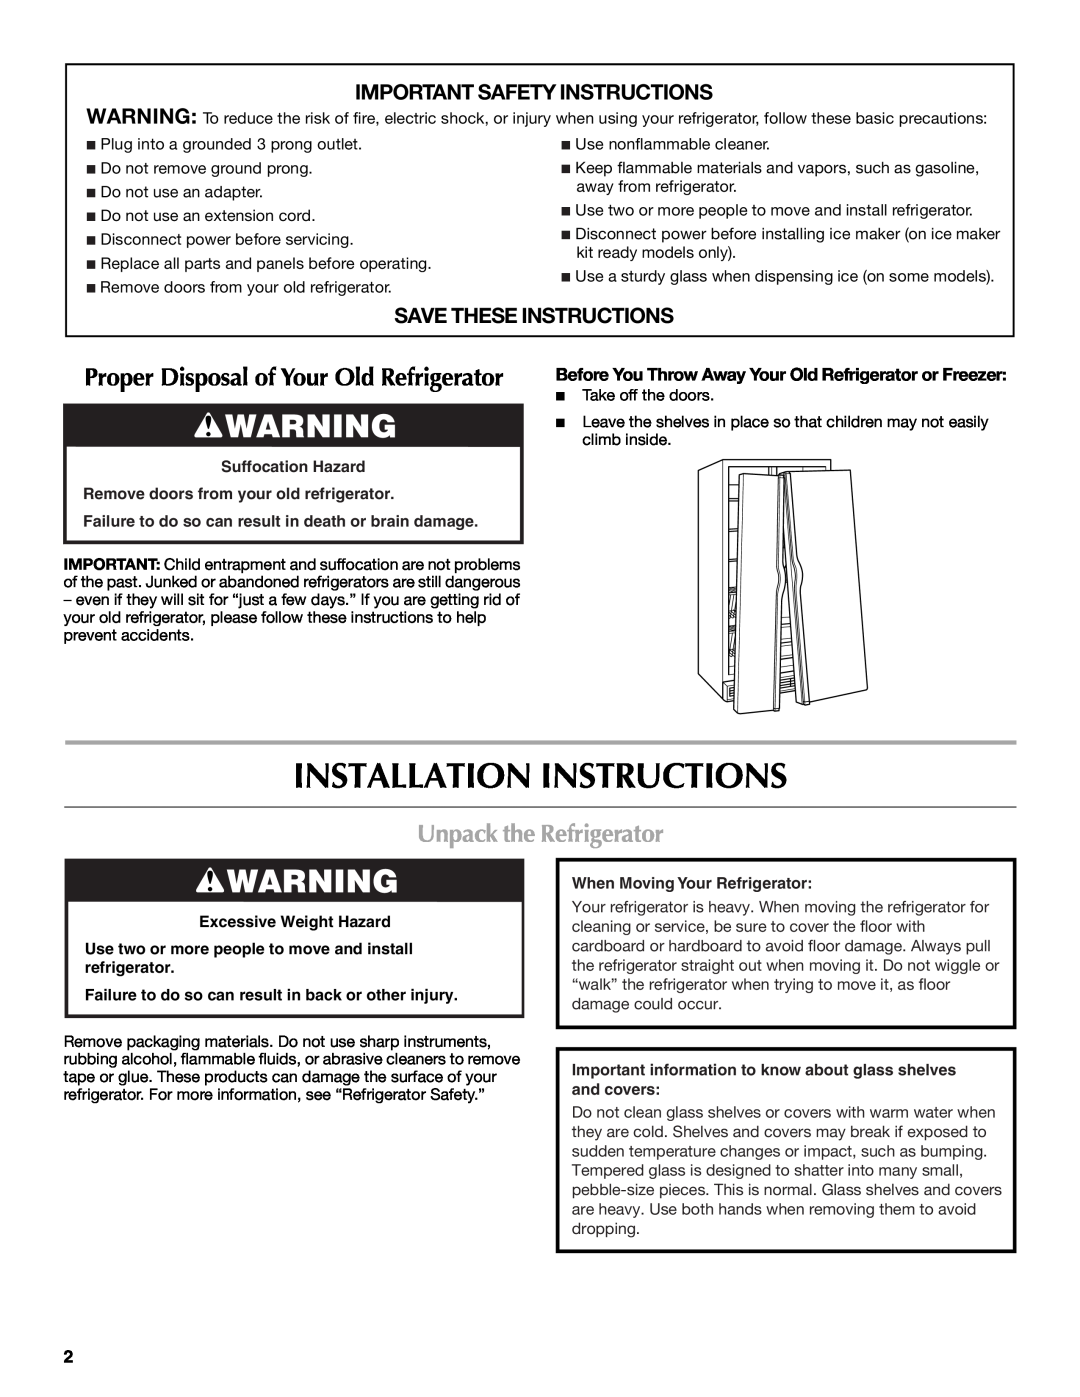 Maytag W10213158A Installation Instructions, Unpack the Refrigerator, Important Safety Instructions, Suffocation Hazard 